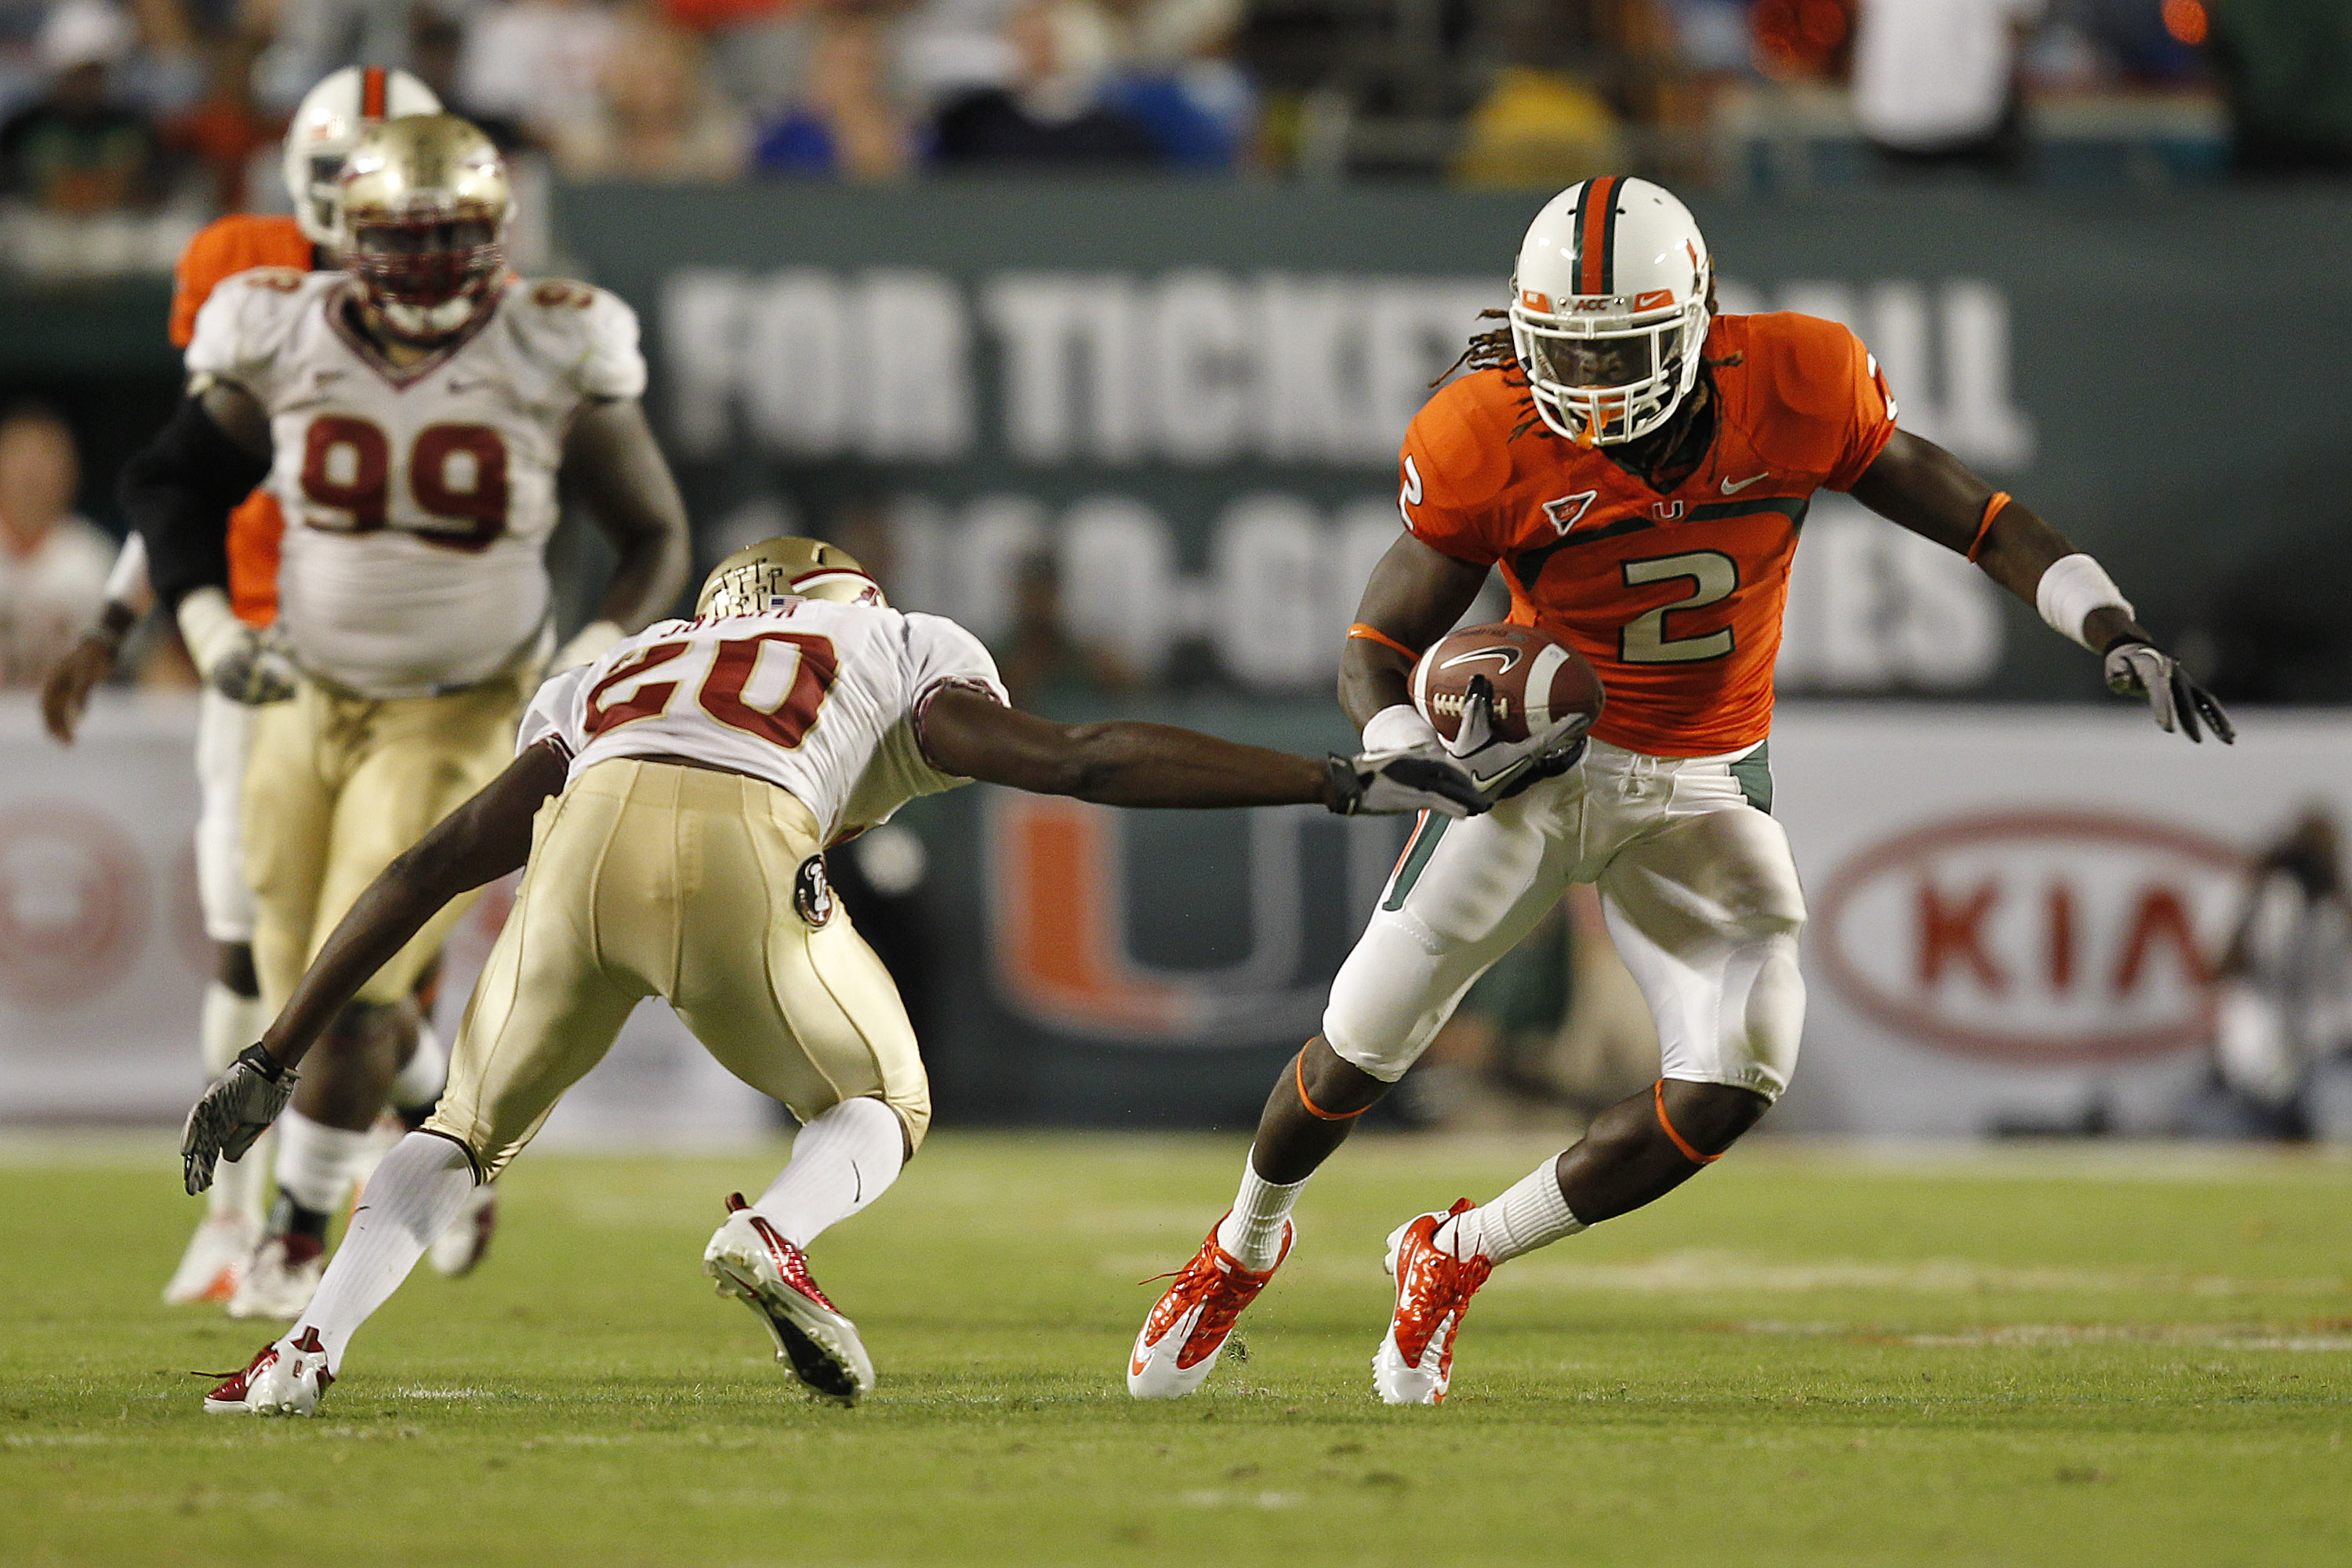 MIAMI, FL - OCTOBER 9: Graig Cooper #2 of the Miami Hurricanes runs with the ball and eludes the tackloe of Lamarcus Joyner #20 of the Florida State Seminoles on October 9, 2010 at Sun Life Stadium in Miami, Florida. (Photo by Joel Auerbach/Getty Images)